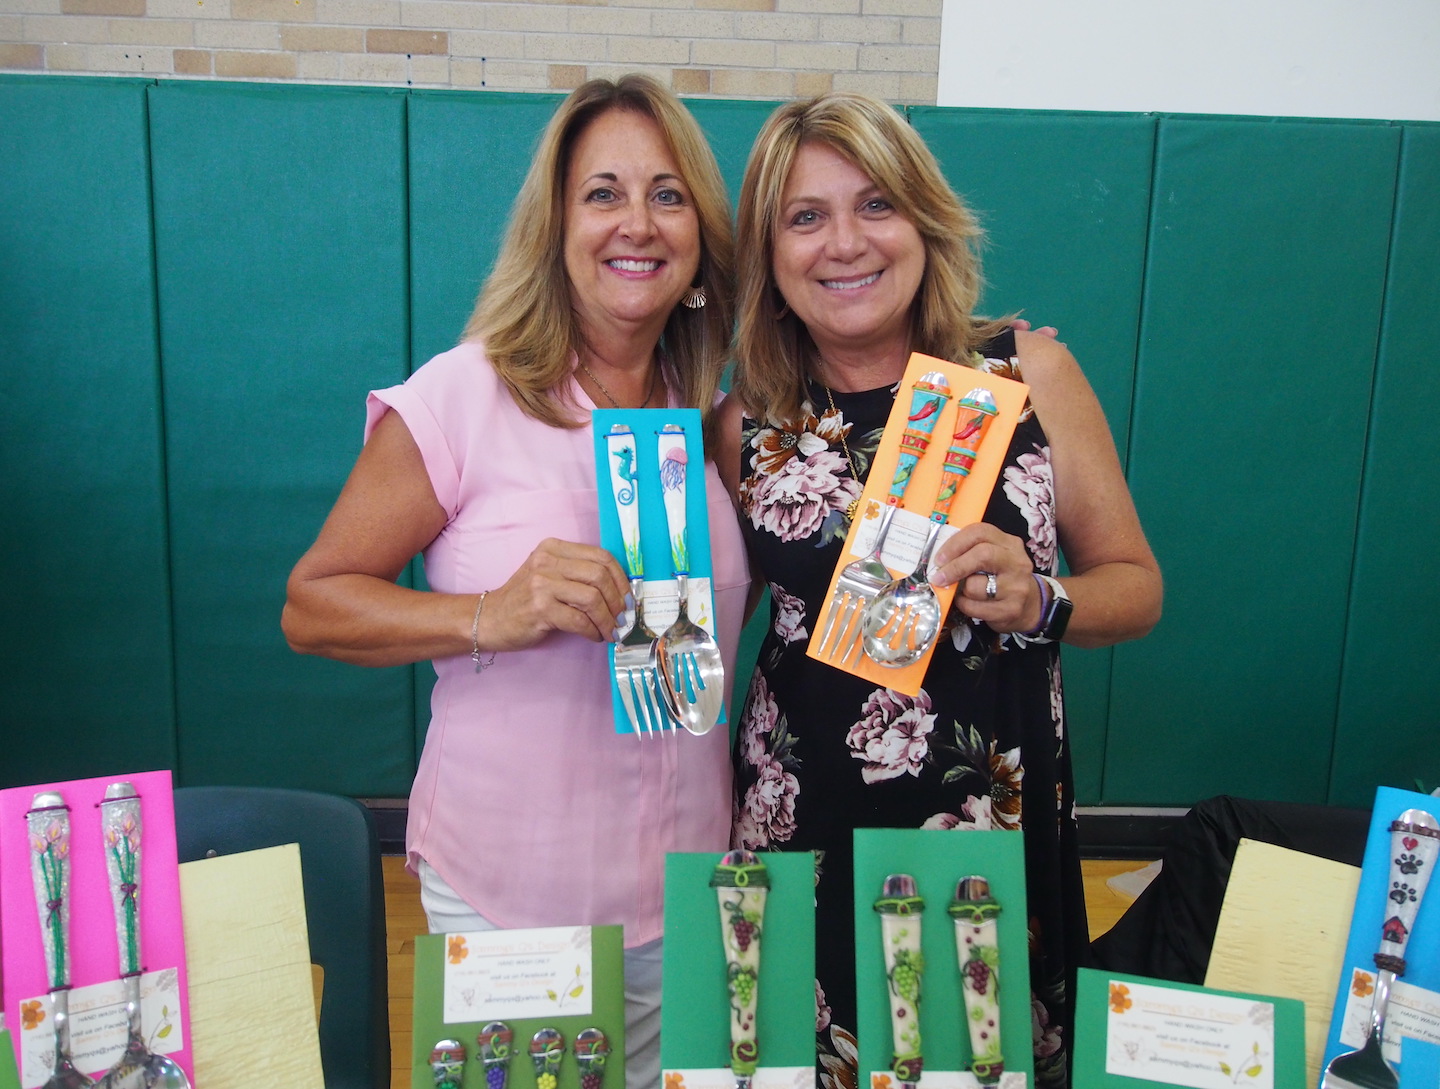 Sandy Merletti and Tammy Irving are neighbors who became crafting partners, eventually leading them to running a business together.